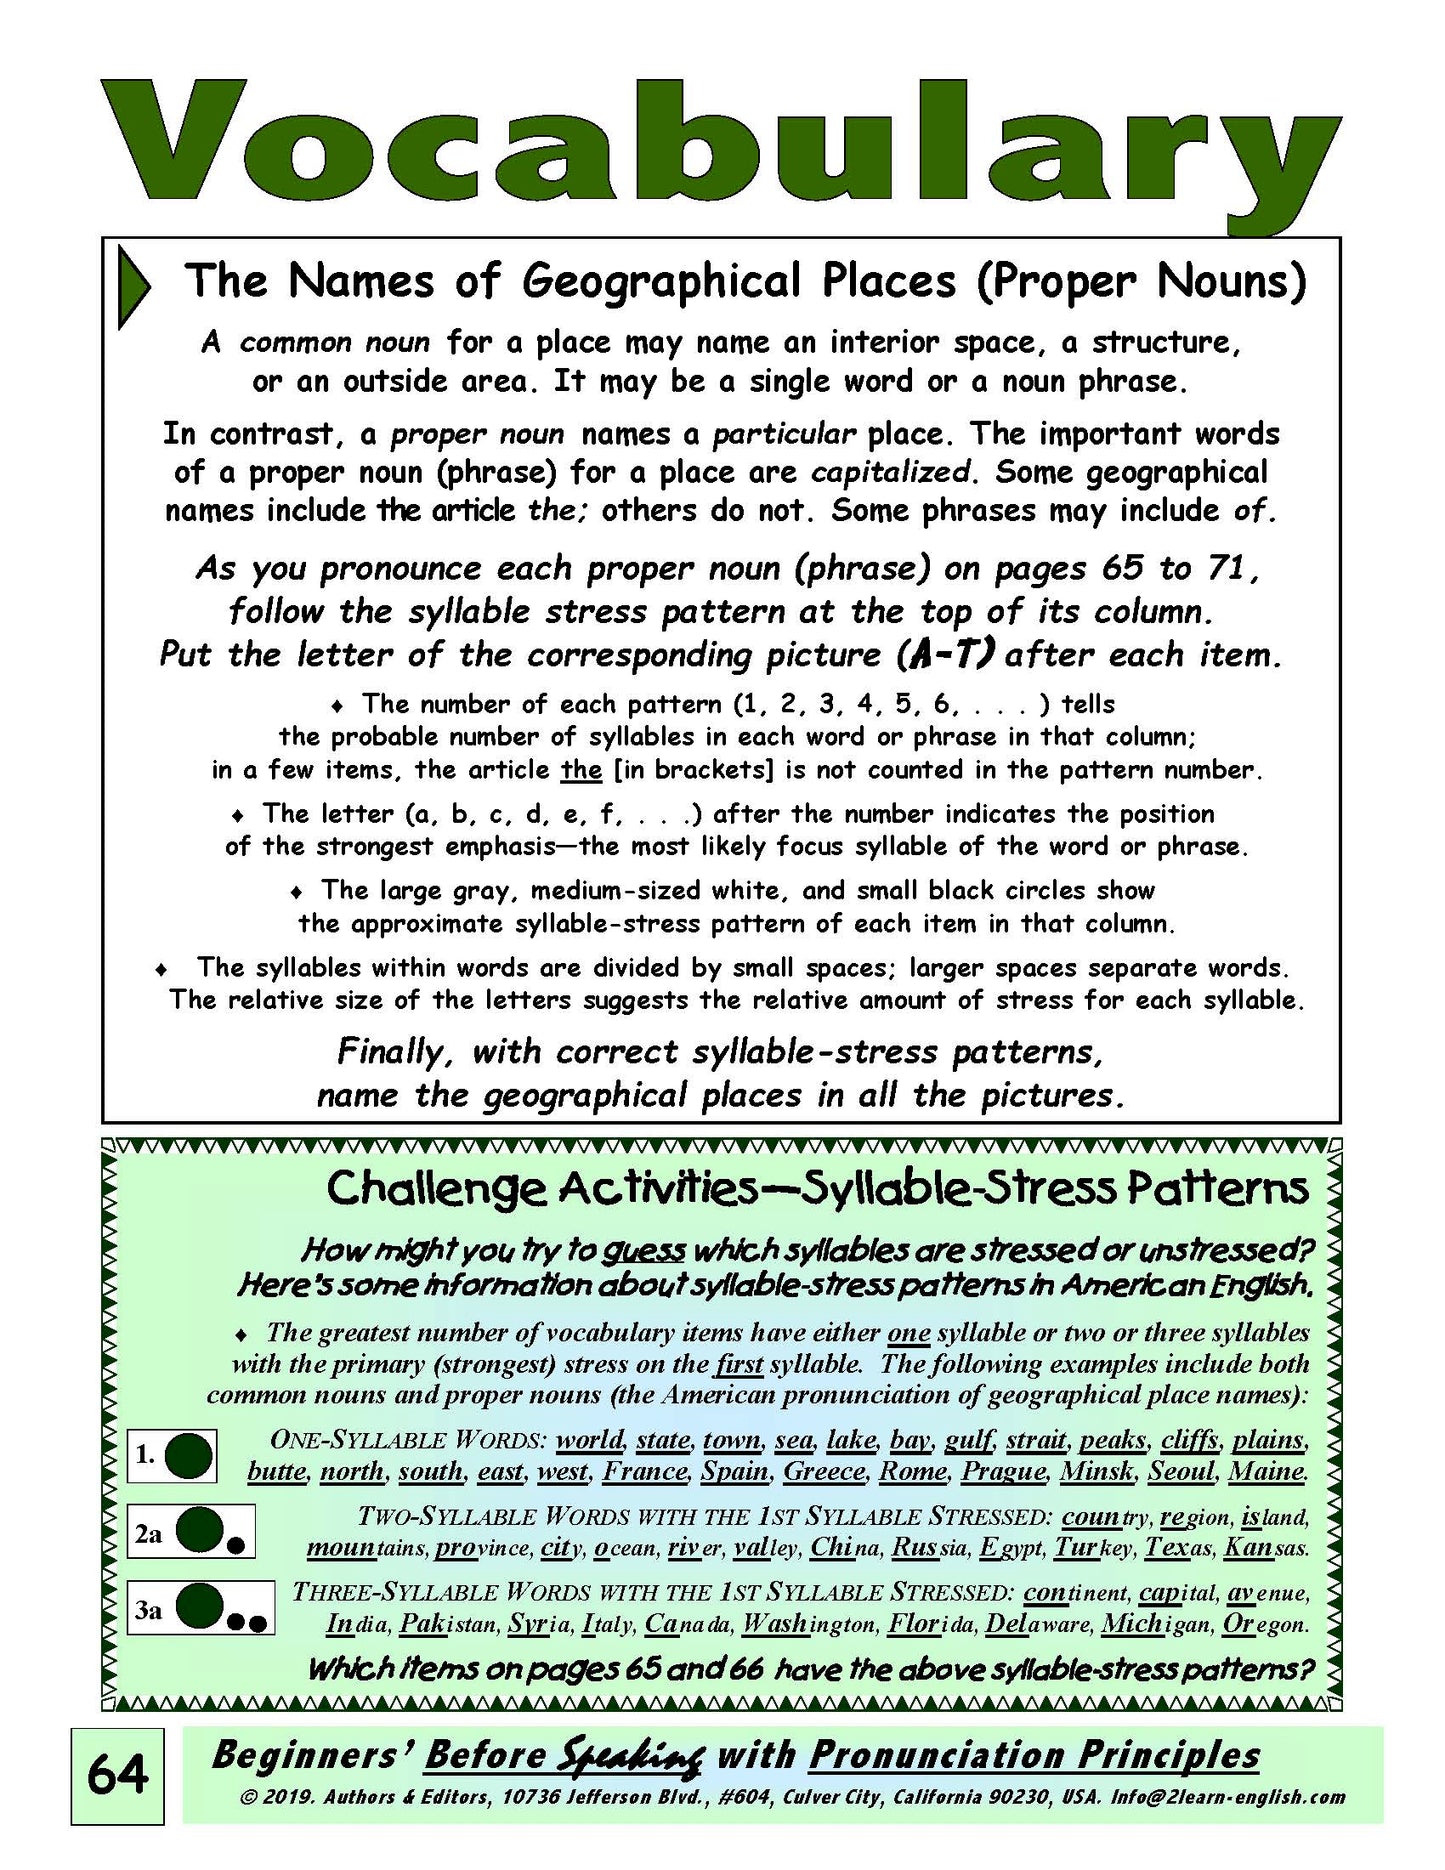 E-02.04 Use Syllable-Stress Patterns in Geographical Place Names + Talk About Location